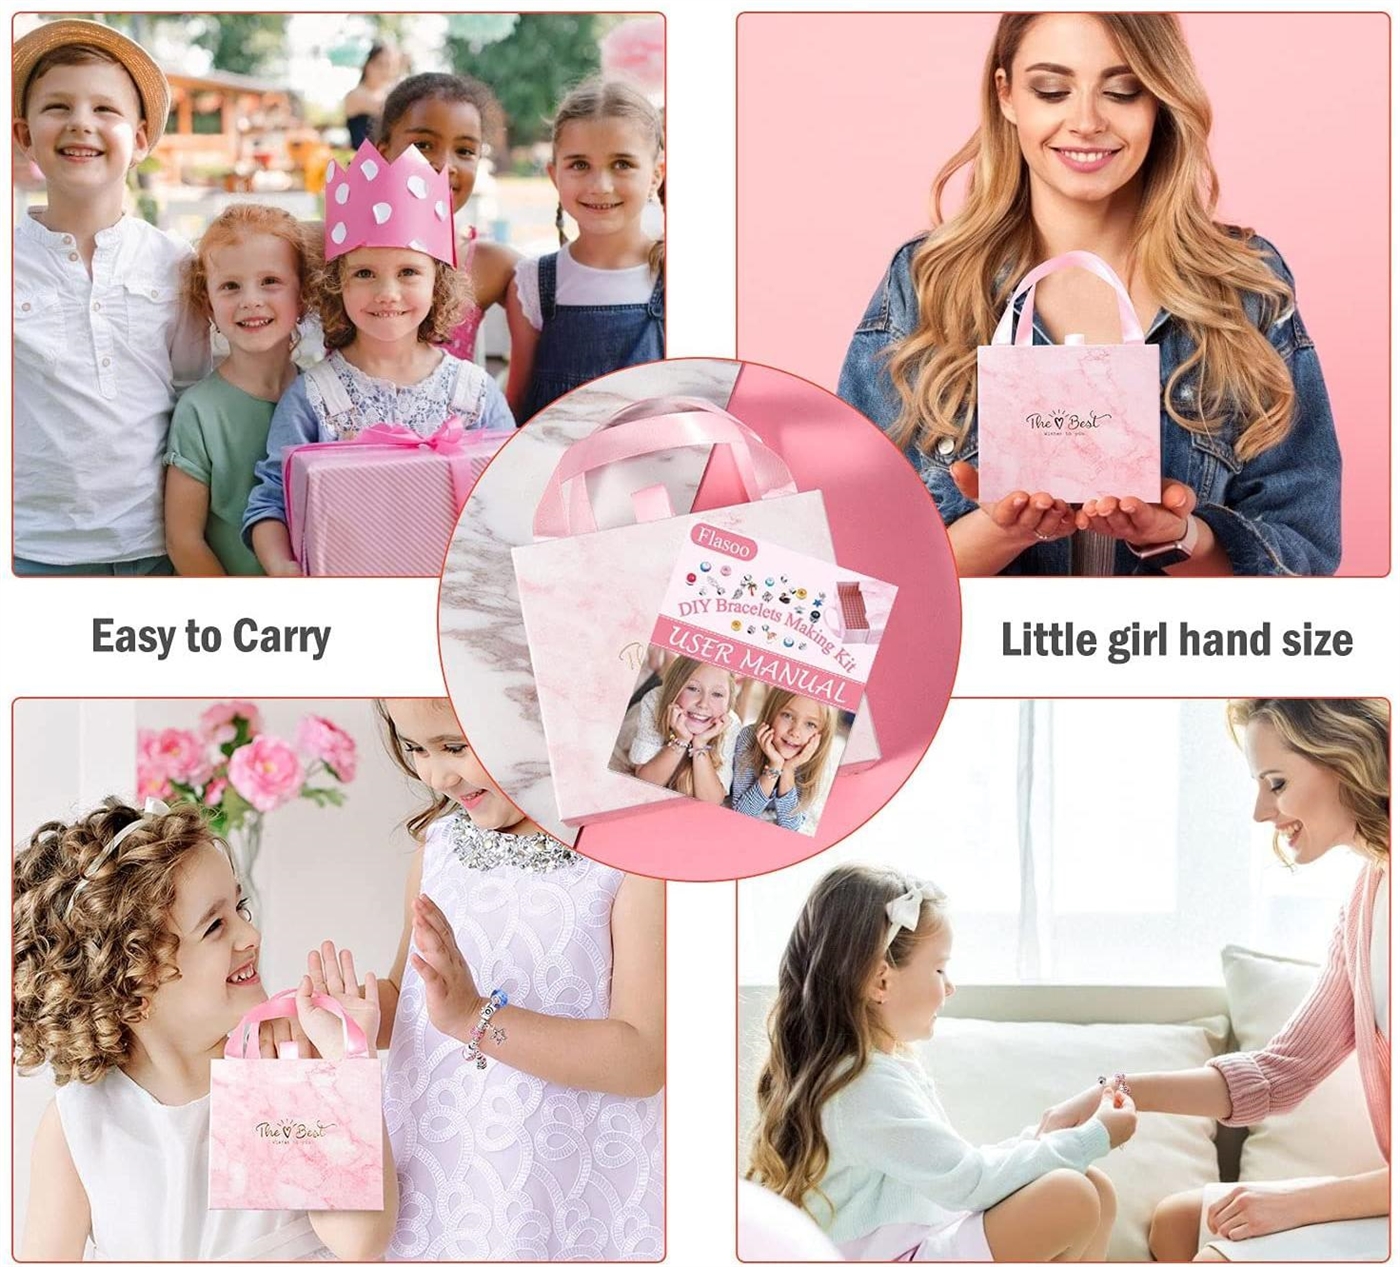 perfect gift for girls and shared by the entire family 